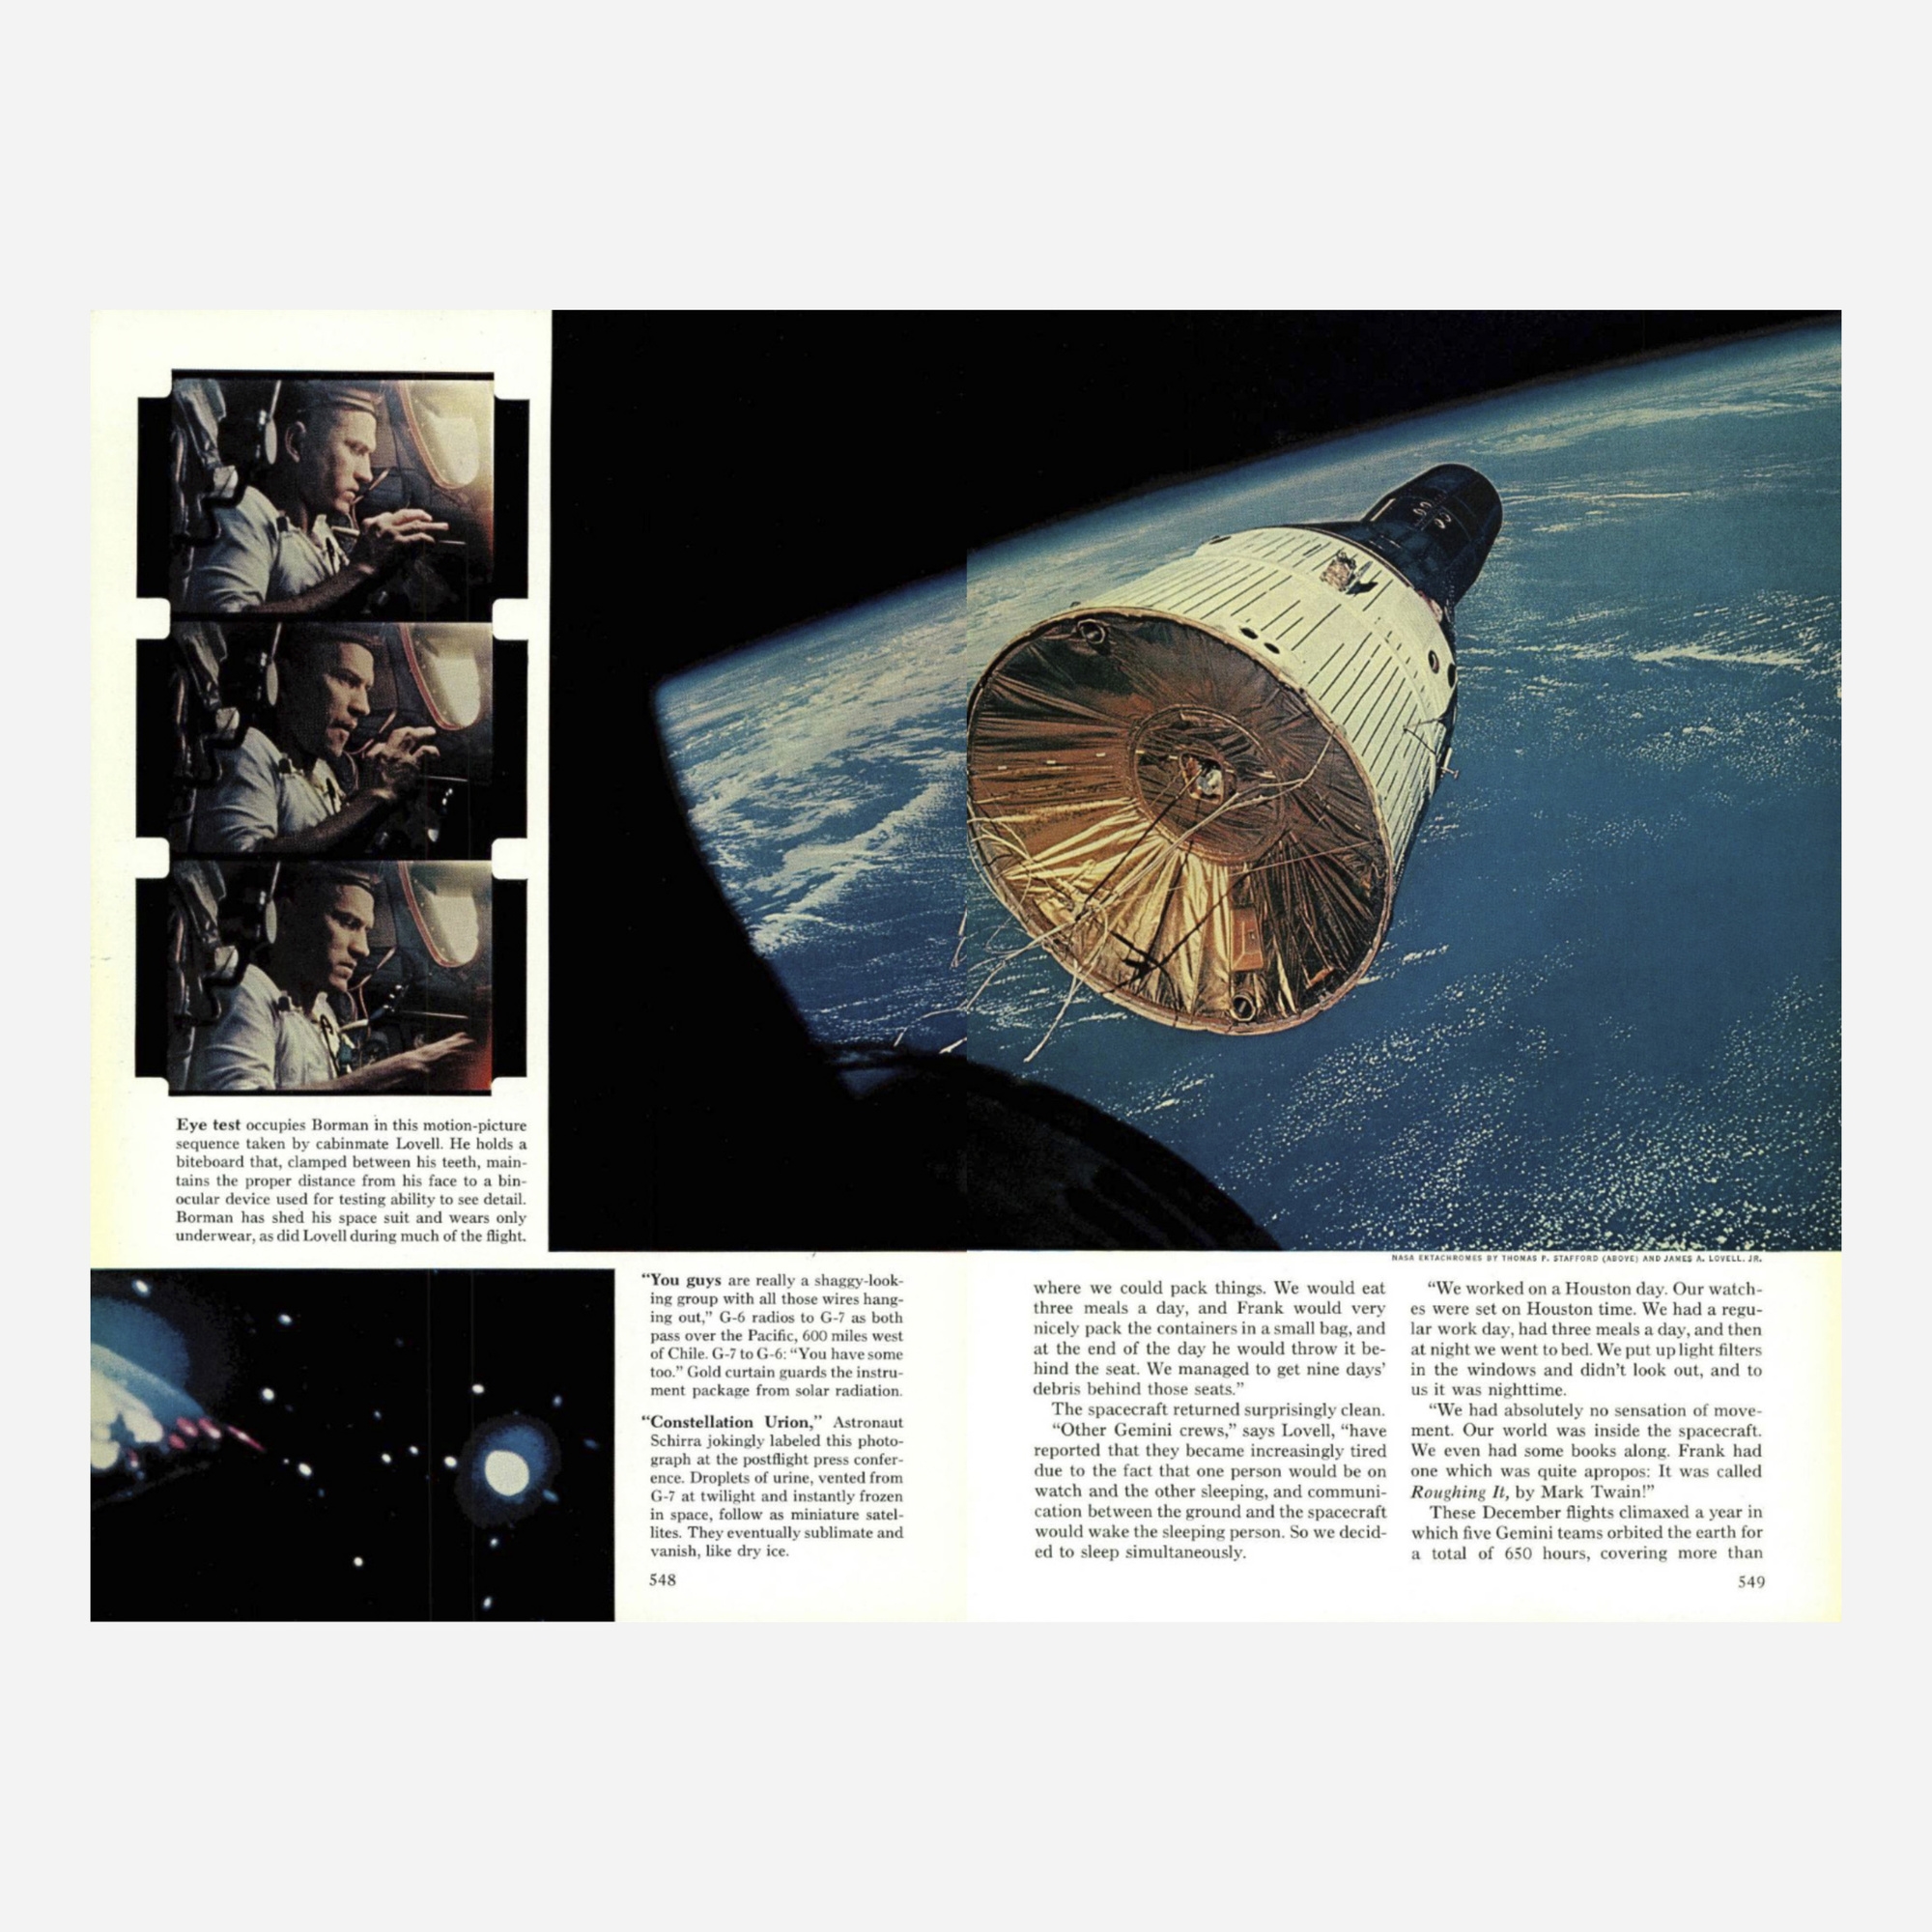 Thomas Stafford, First rendezvous in space, at 17,000 mph: Gemini VII  spacecraft orbiting the blue Earth, Thomas Stafford [Gemini VI-A], 15-16  December 1965